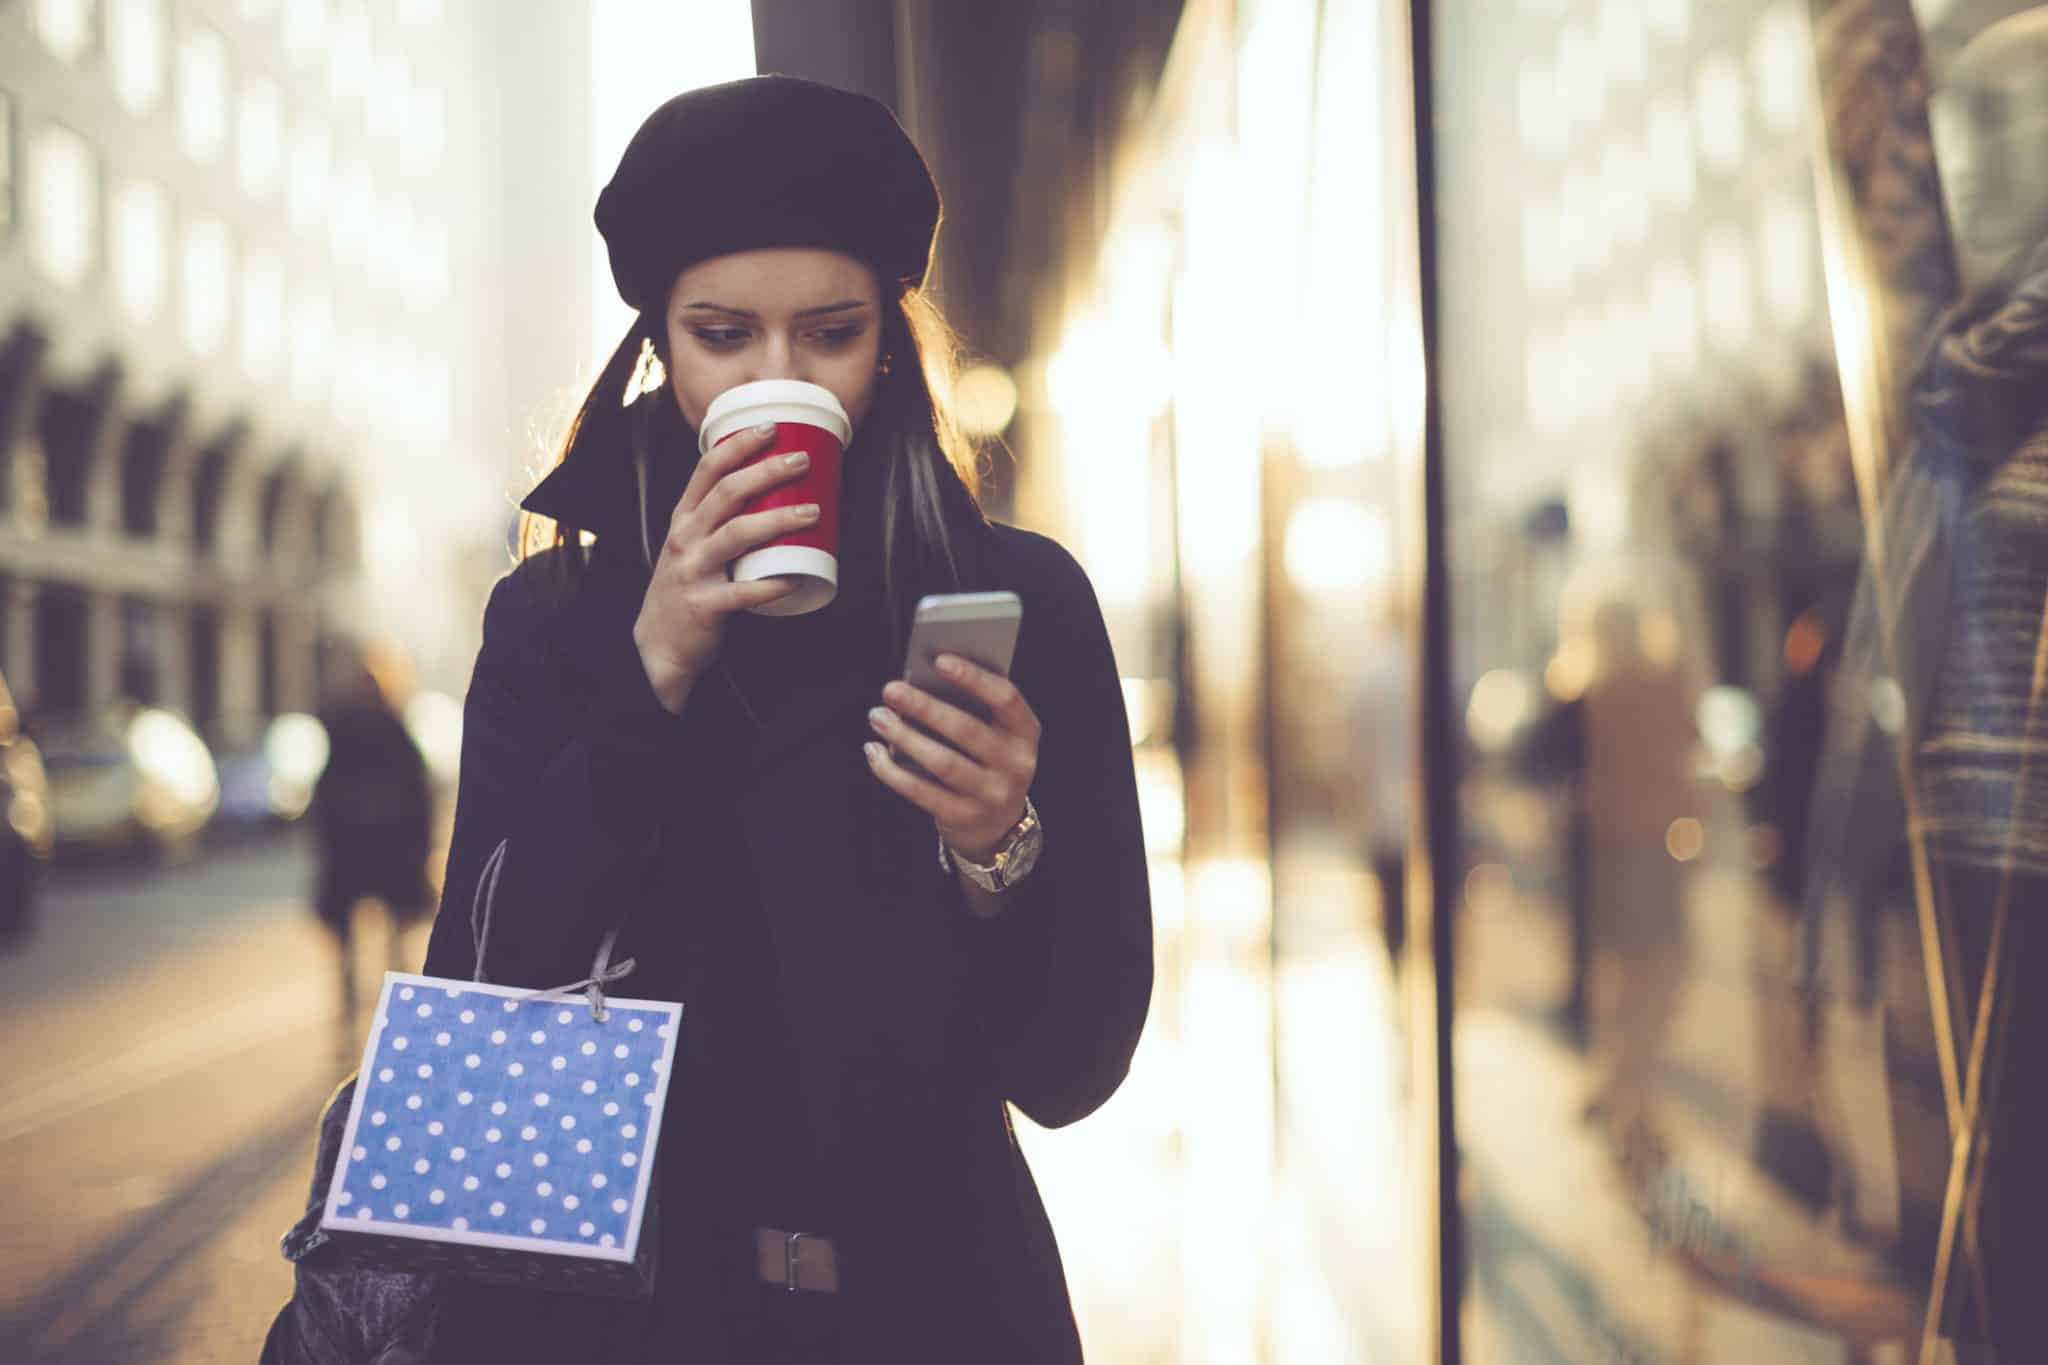 Shopper Sipping Coffee and Holding a Mobile Phone - KX